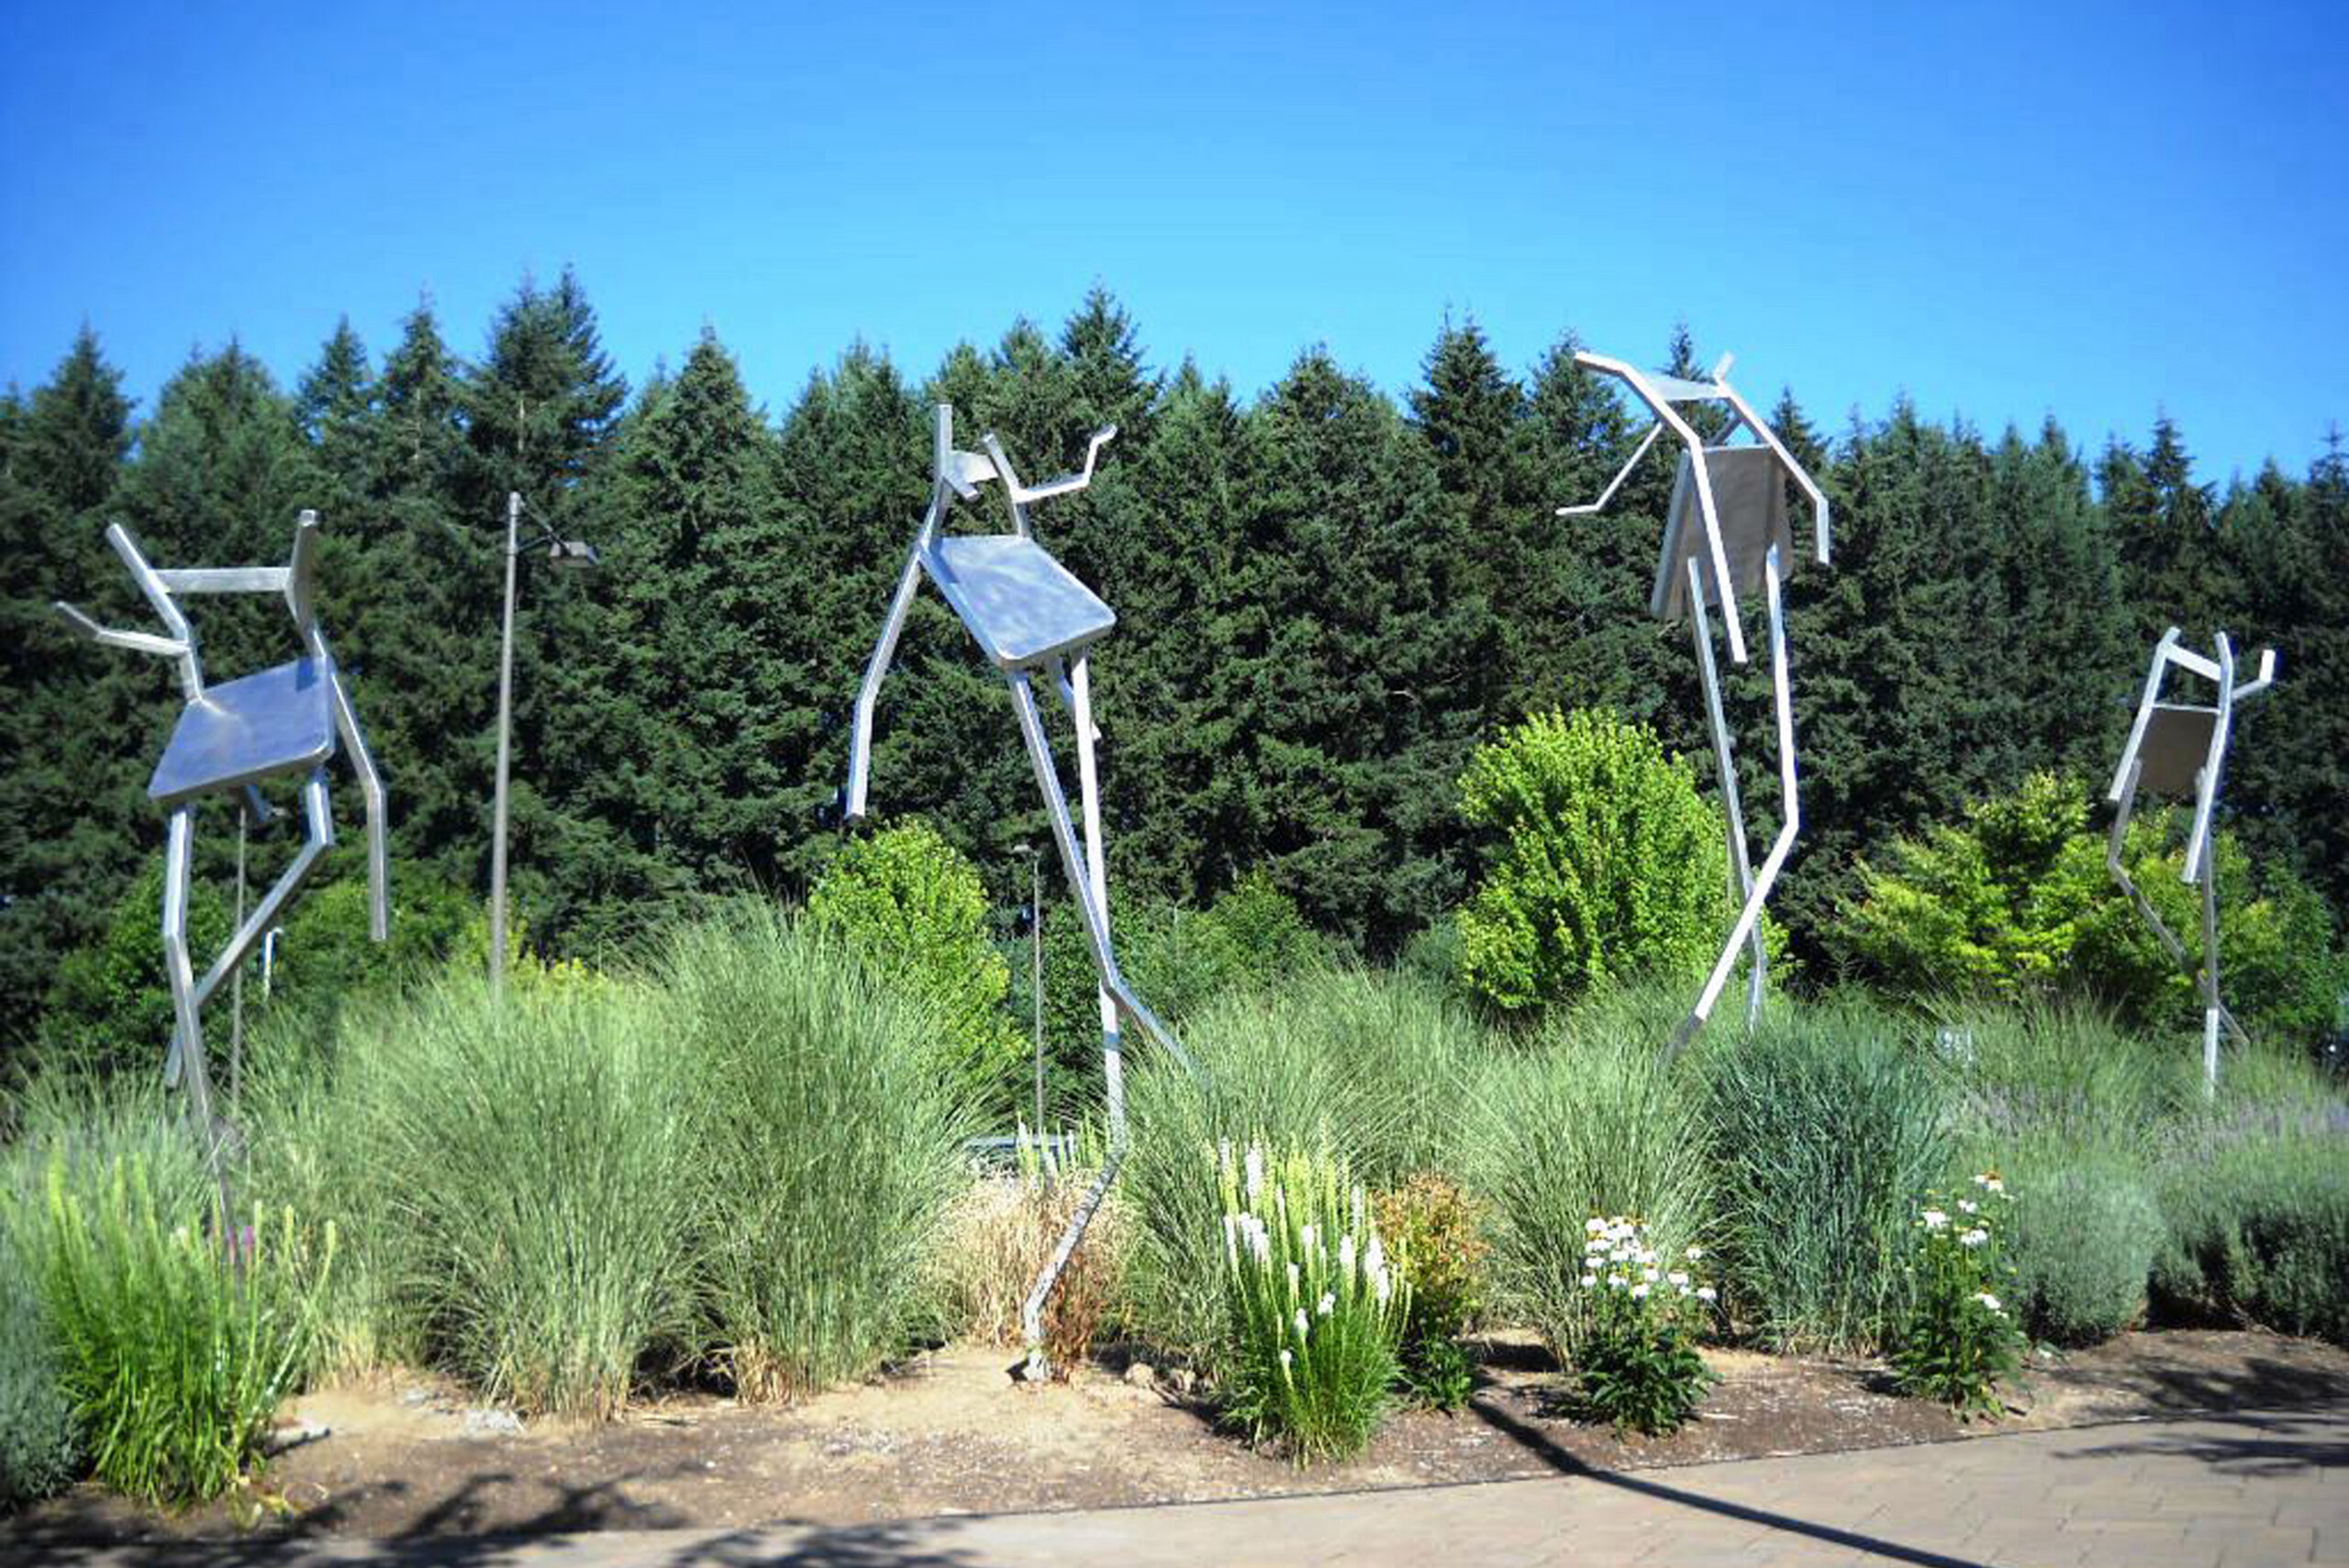 Four huge metal chair sculptures outside